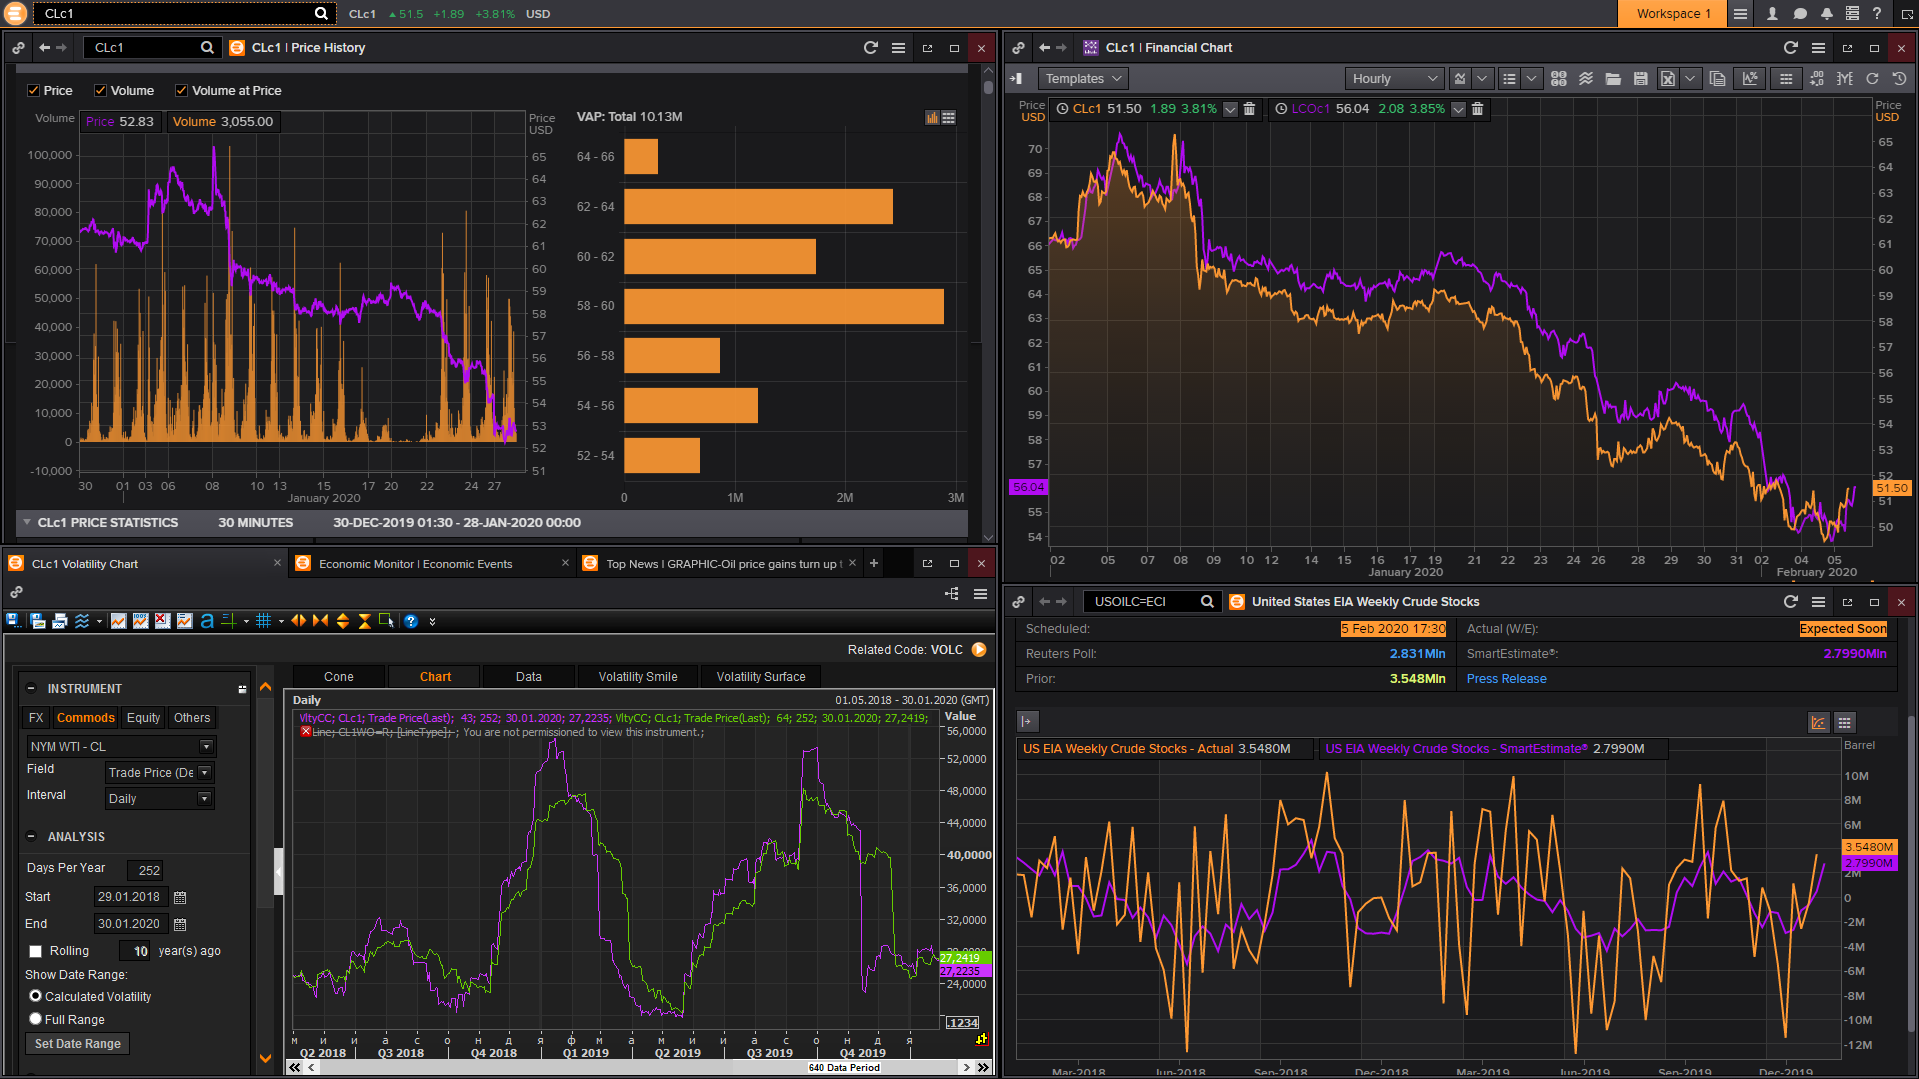 MetaStock Xenith / Eikon is available in Quantower ...